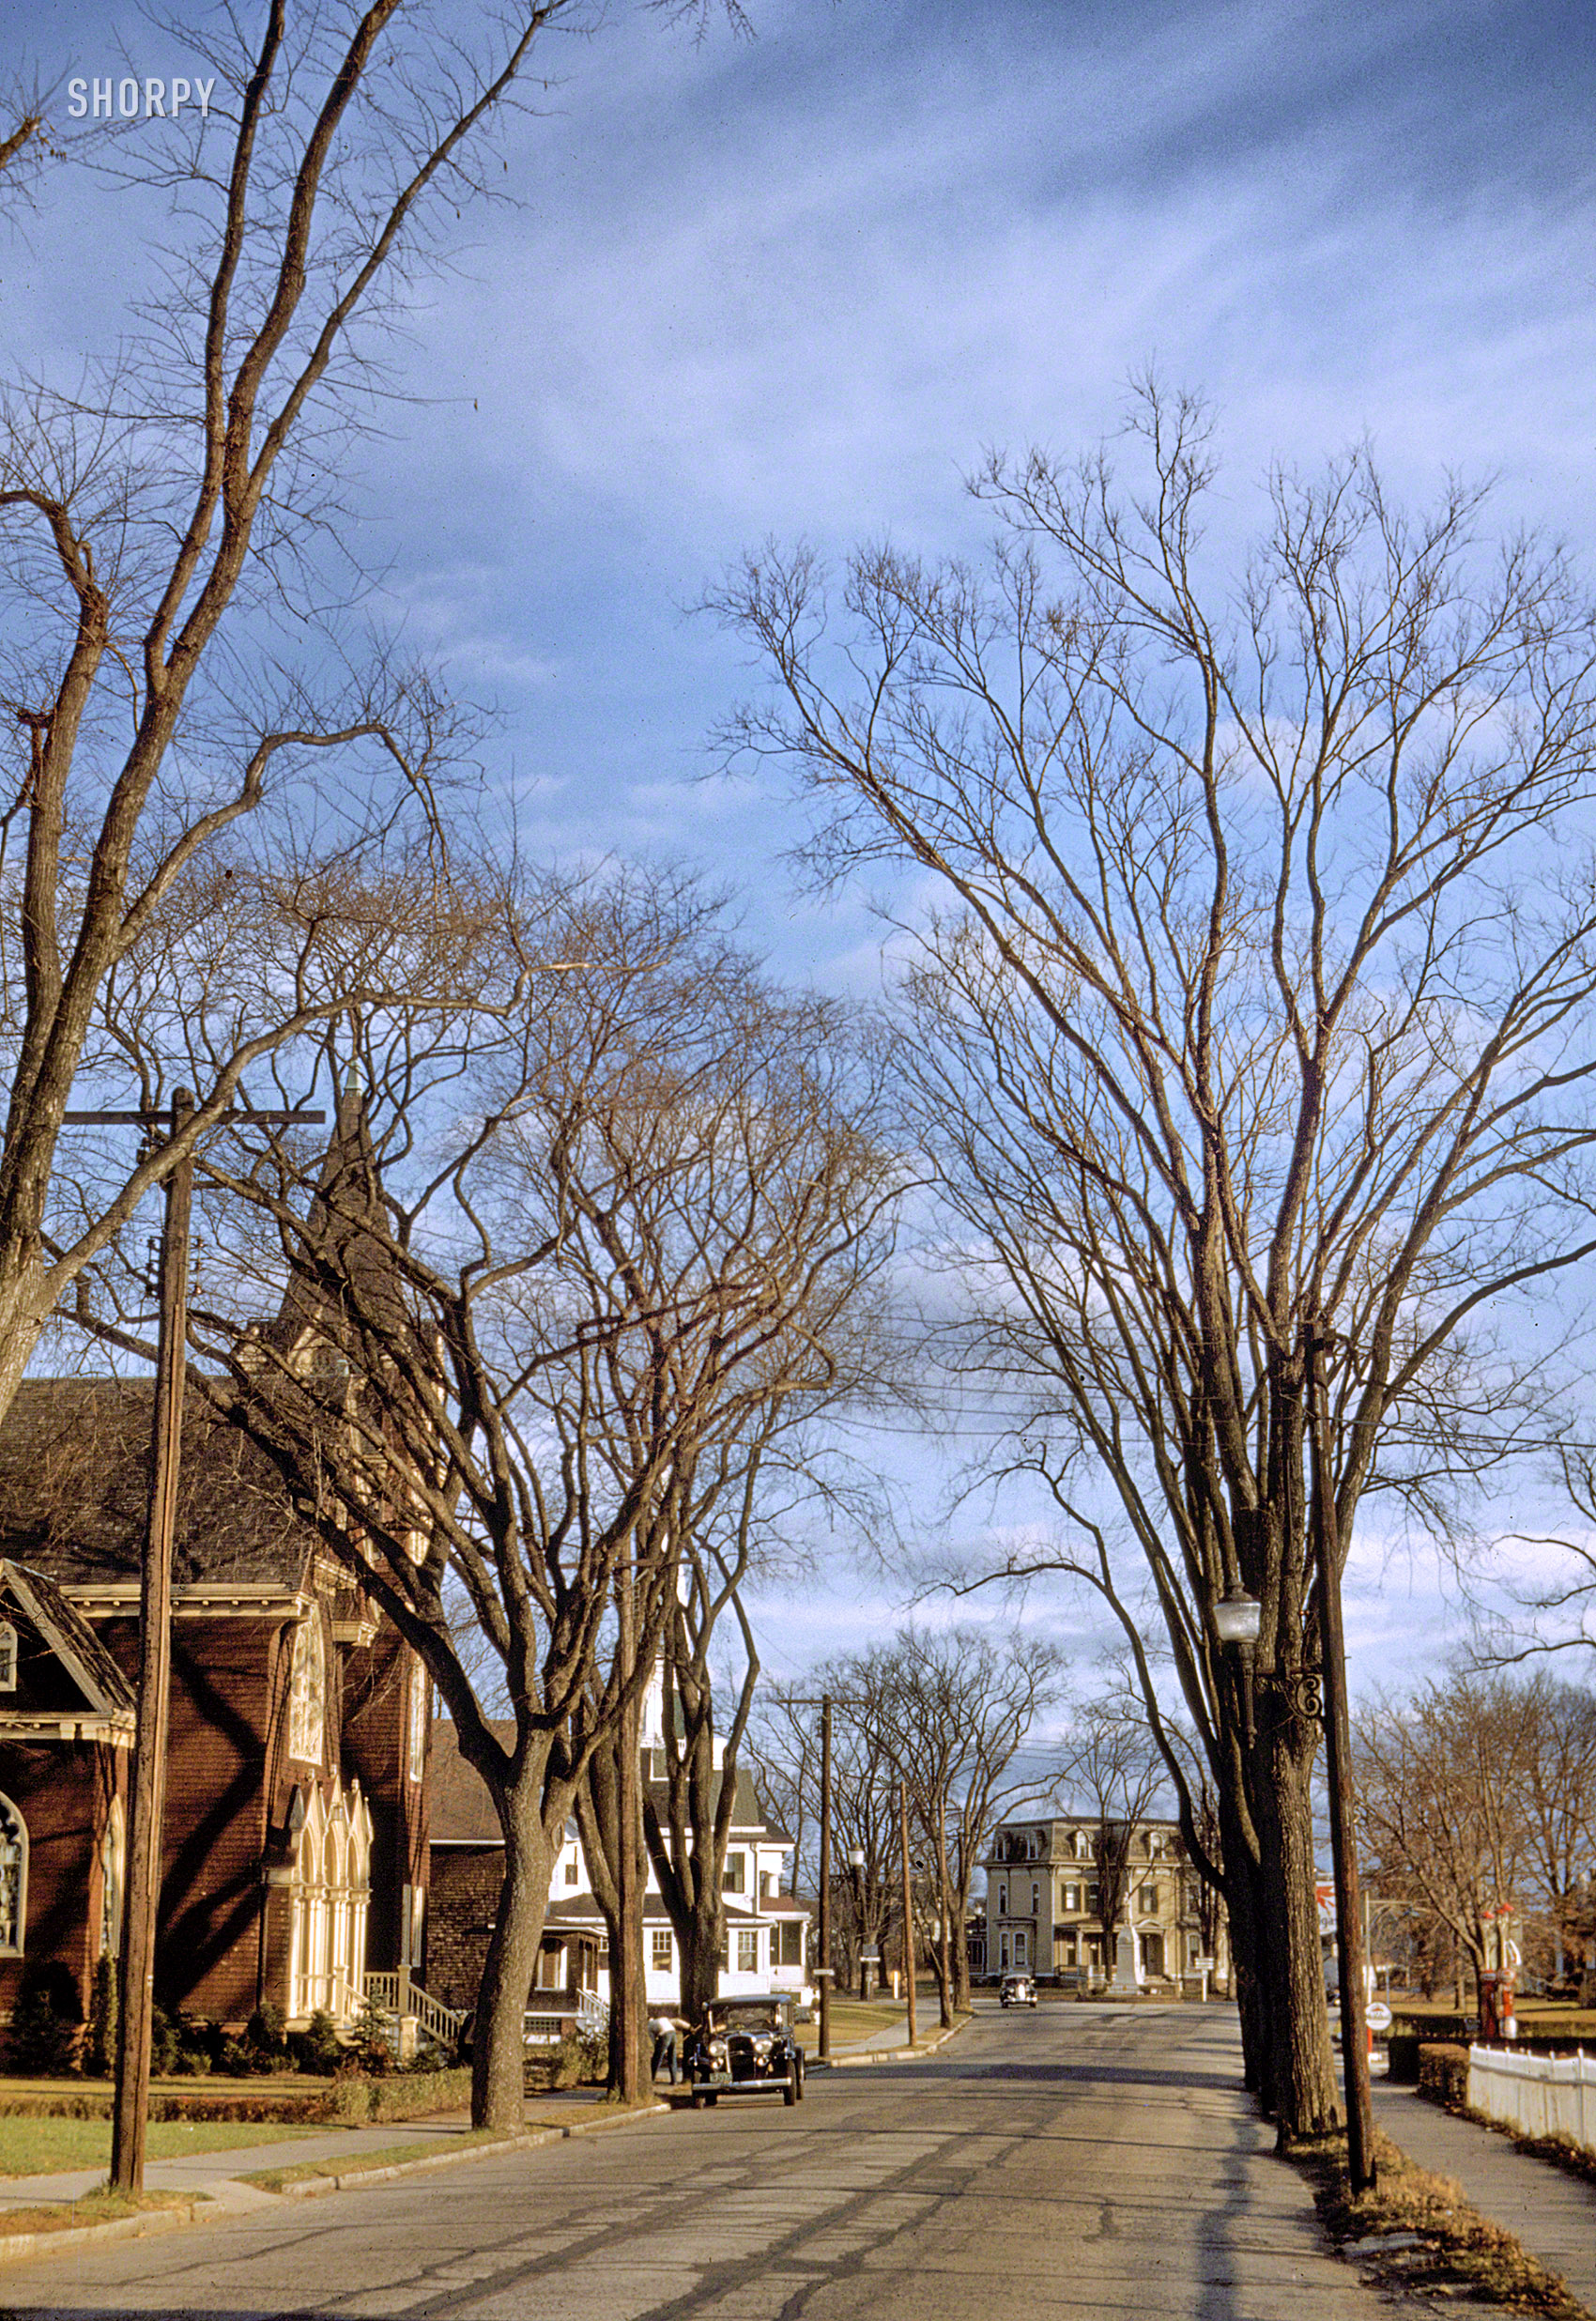 November 1940. "Street scene in Mystic, Connecticut." A view down East Main Street of the Christopher Morgan house, last seen here. 35mm Kodachrome by Jack Delano for the Farm Security Administration. View full size.